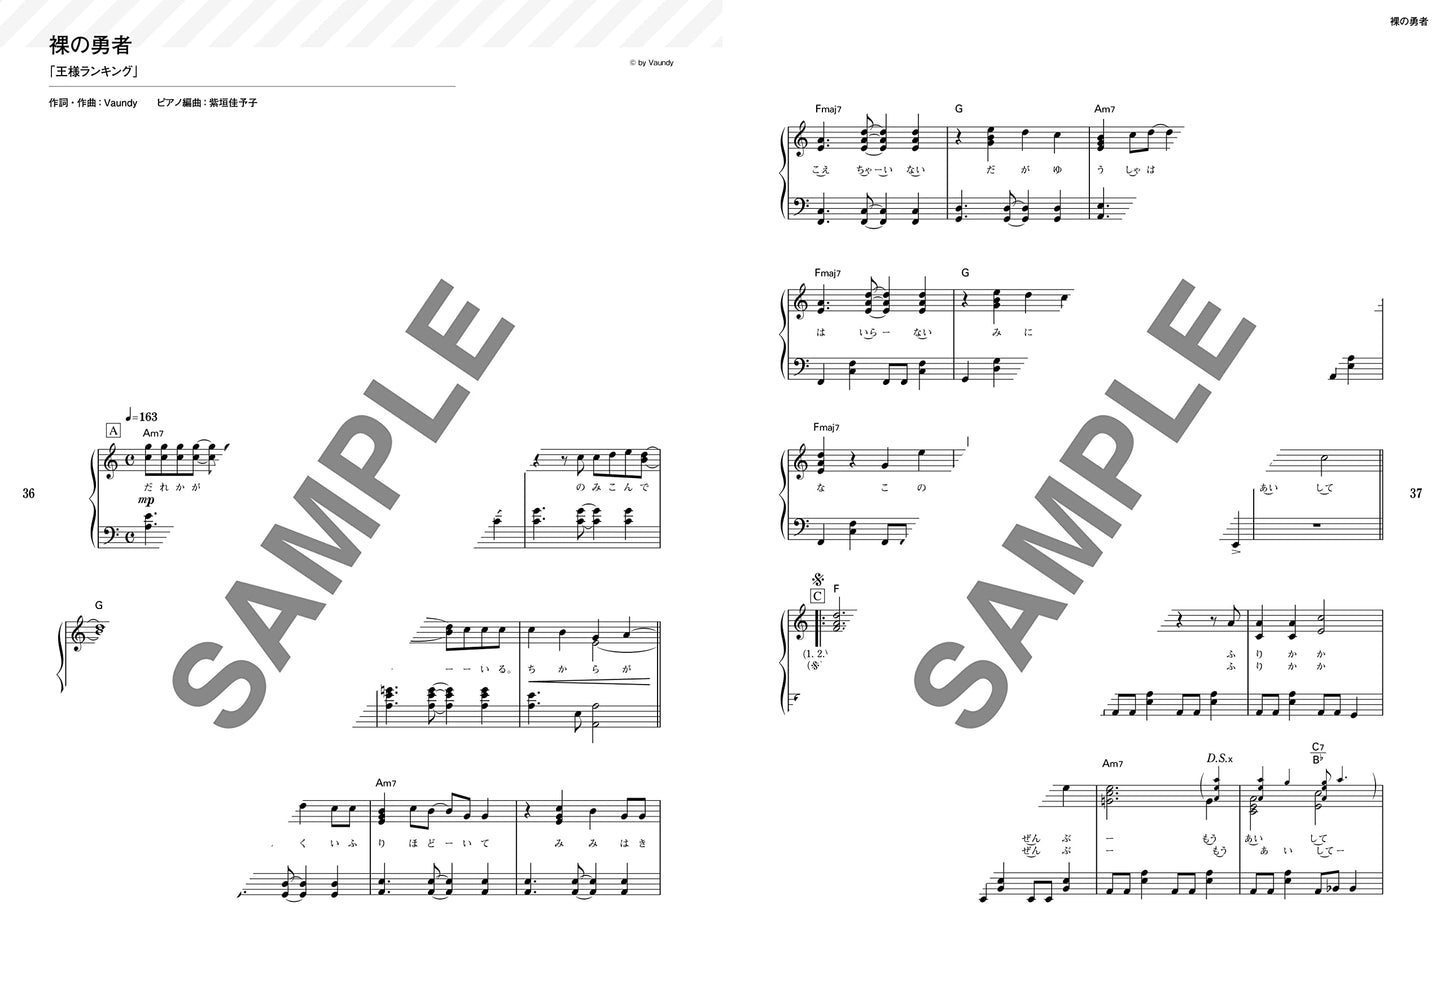 Anime Songs(Anison) for Piano Solo that you really want to play!!(Intermediate) Sheet Music Book